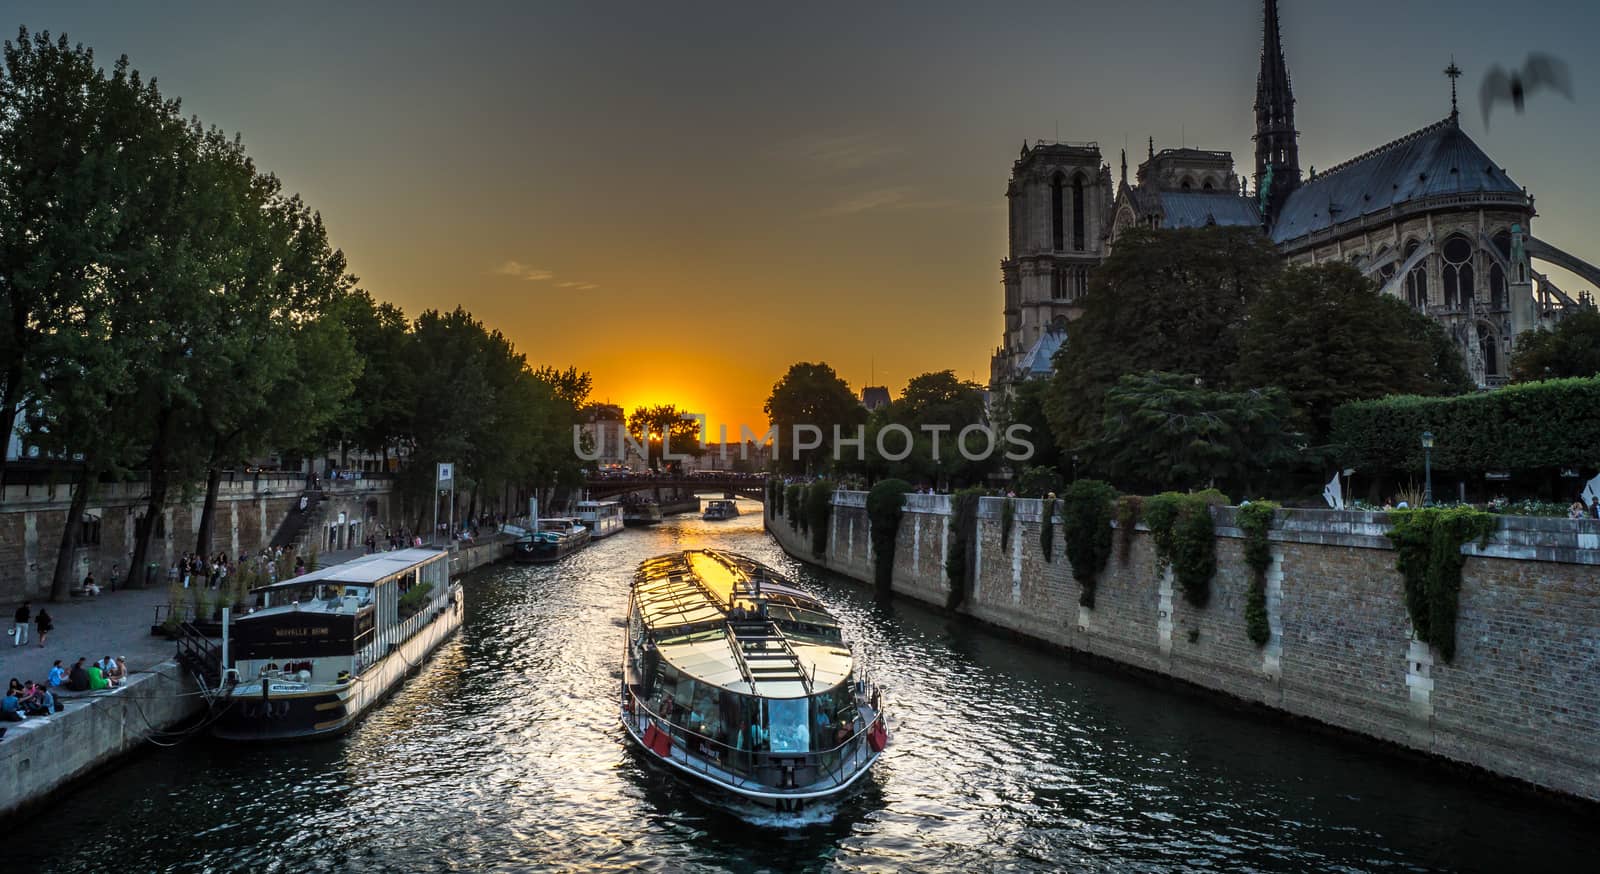 Peniche boat in Paris at sunset by bignoub